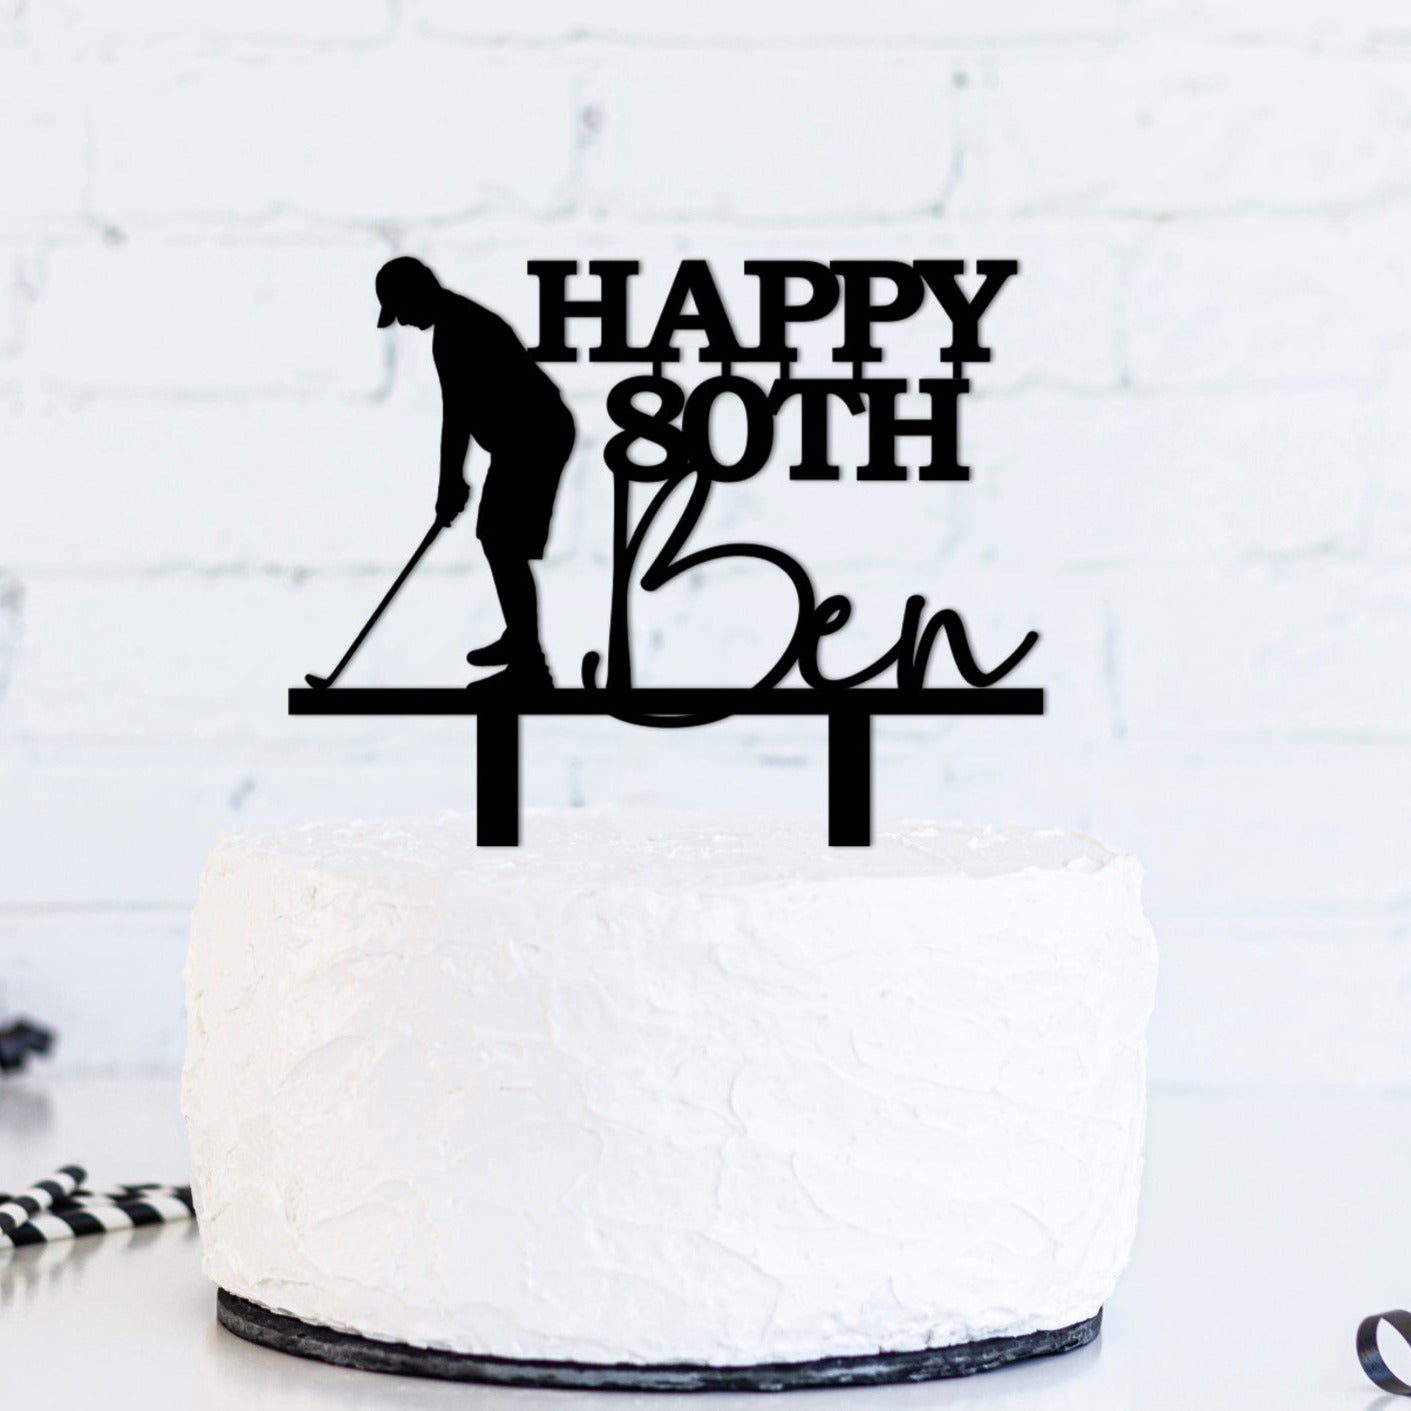 Golf Acrylic Cake Topper featuring a silhouette of a golfer about to take a swing